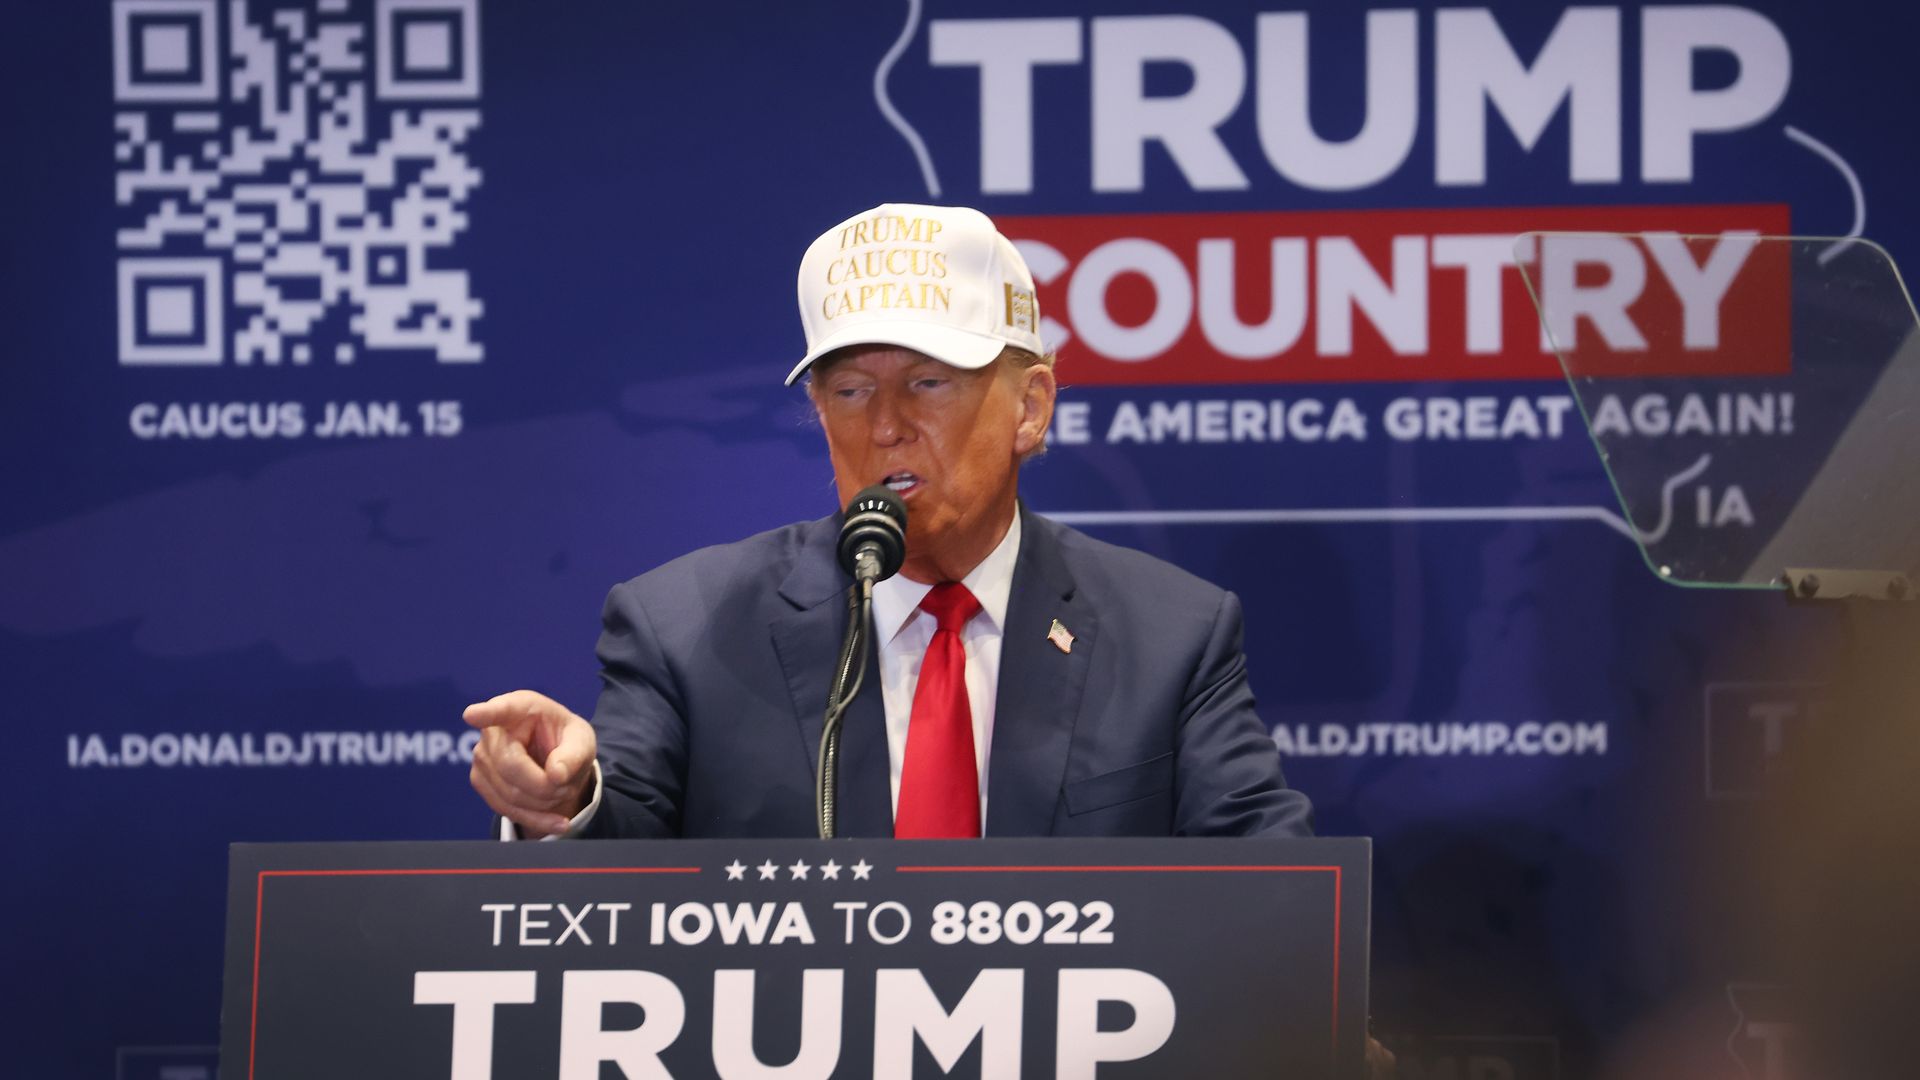 Donald Trump speaks in front of a sign that says "Trump Country" promoting the Iowa caucuses. He is pointing in front of him. He's wearing a suit with a red tie and a white cap. 